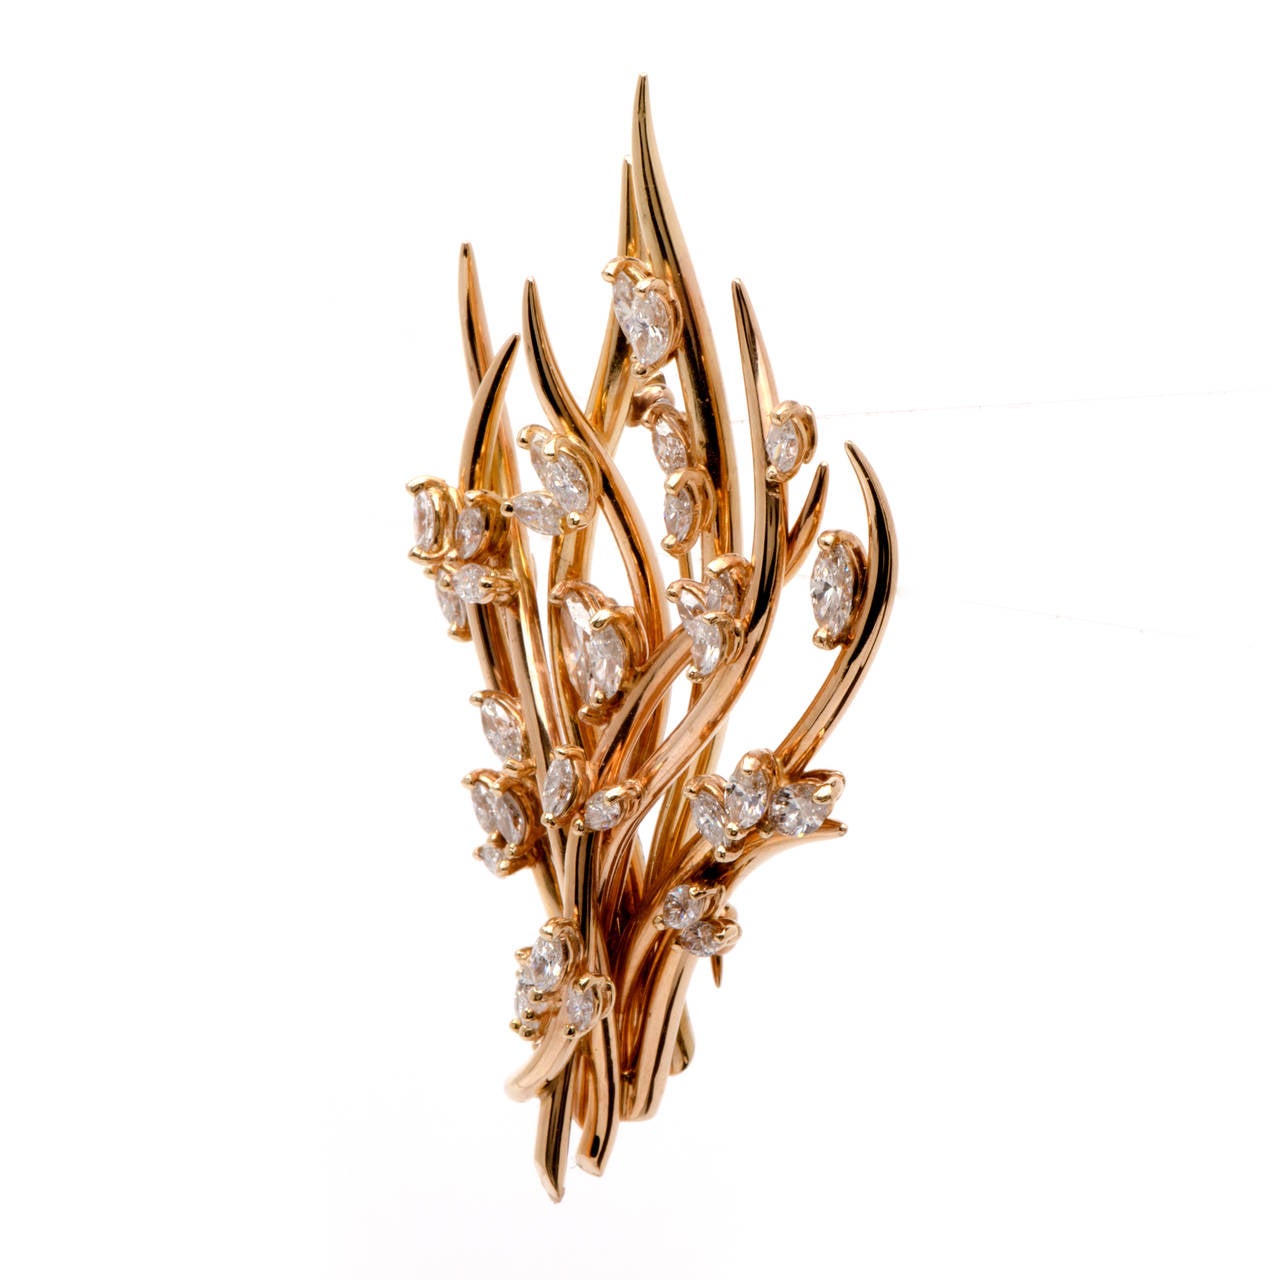 This lovely estate retro diamond branch design pin is crafted in solid 18K rose gold. This stunning pin is adorned with some 37 genuine marquise diamonds approx 6.00cts, H-I color, VS clarity, prong set. This item is in excellent